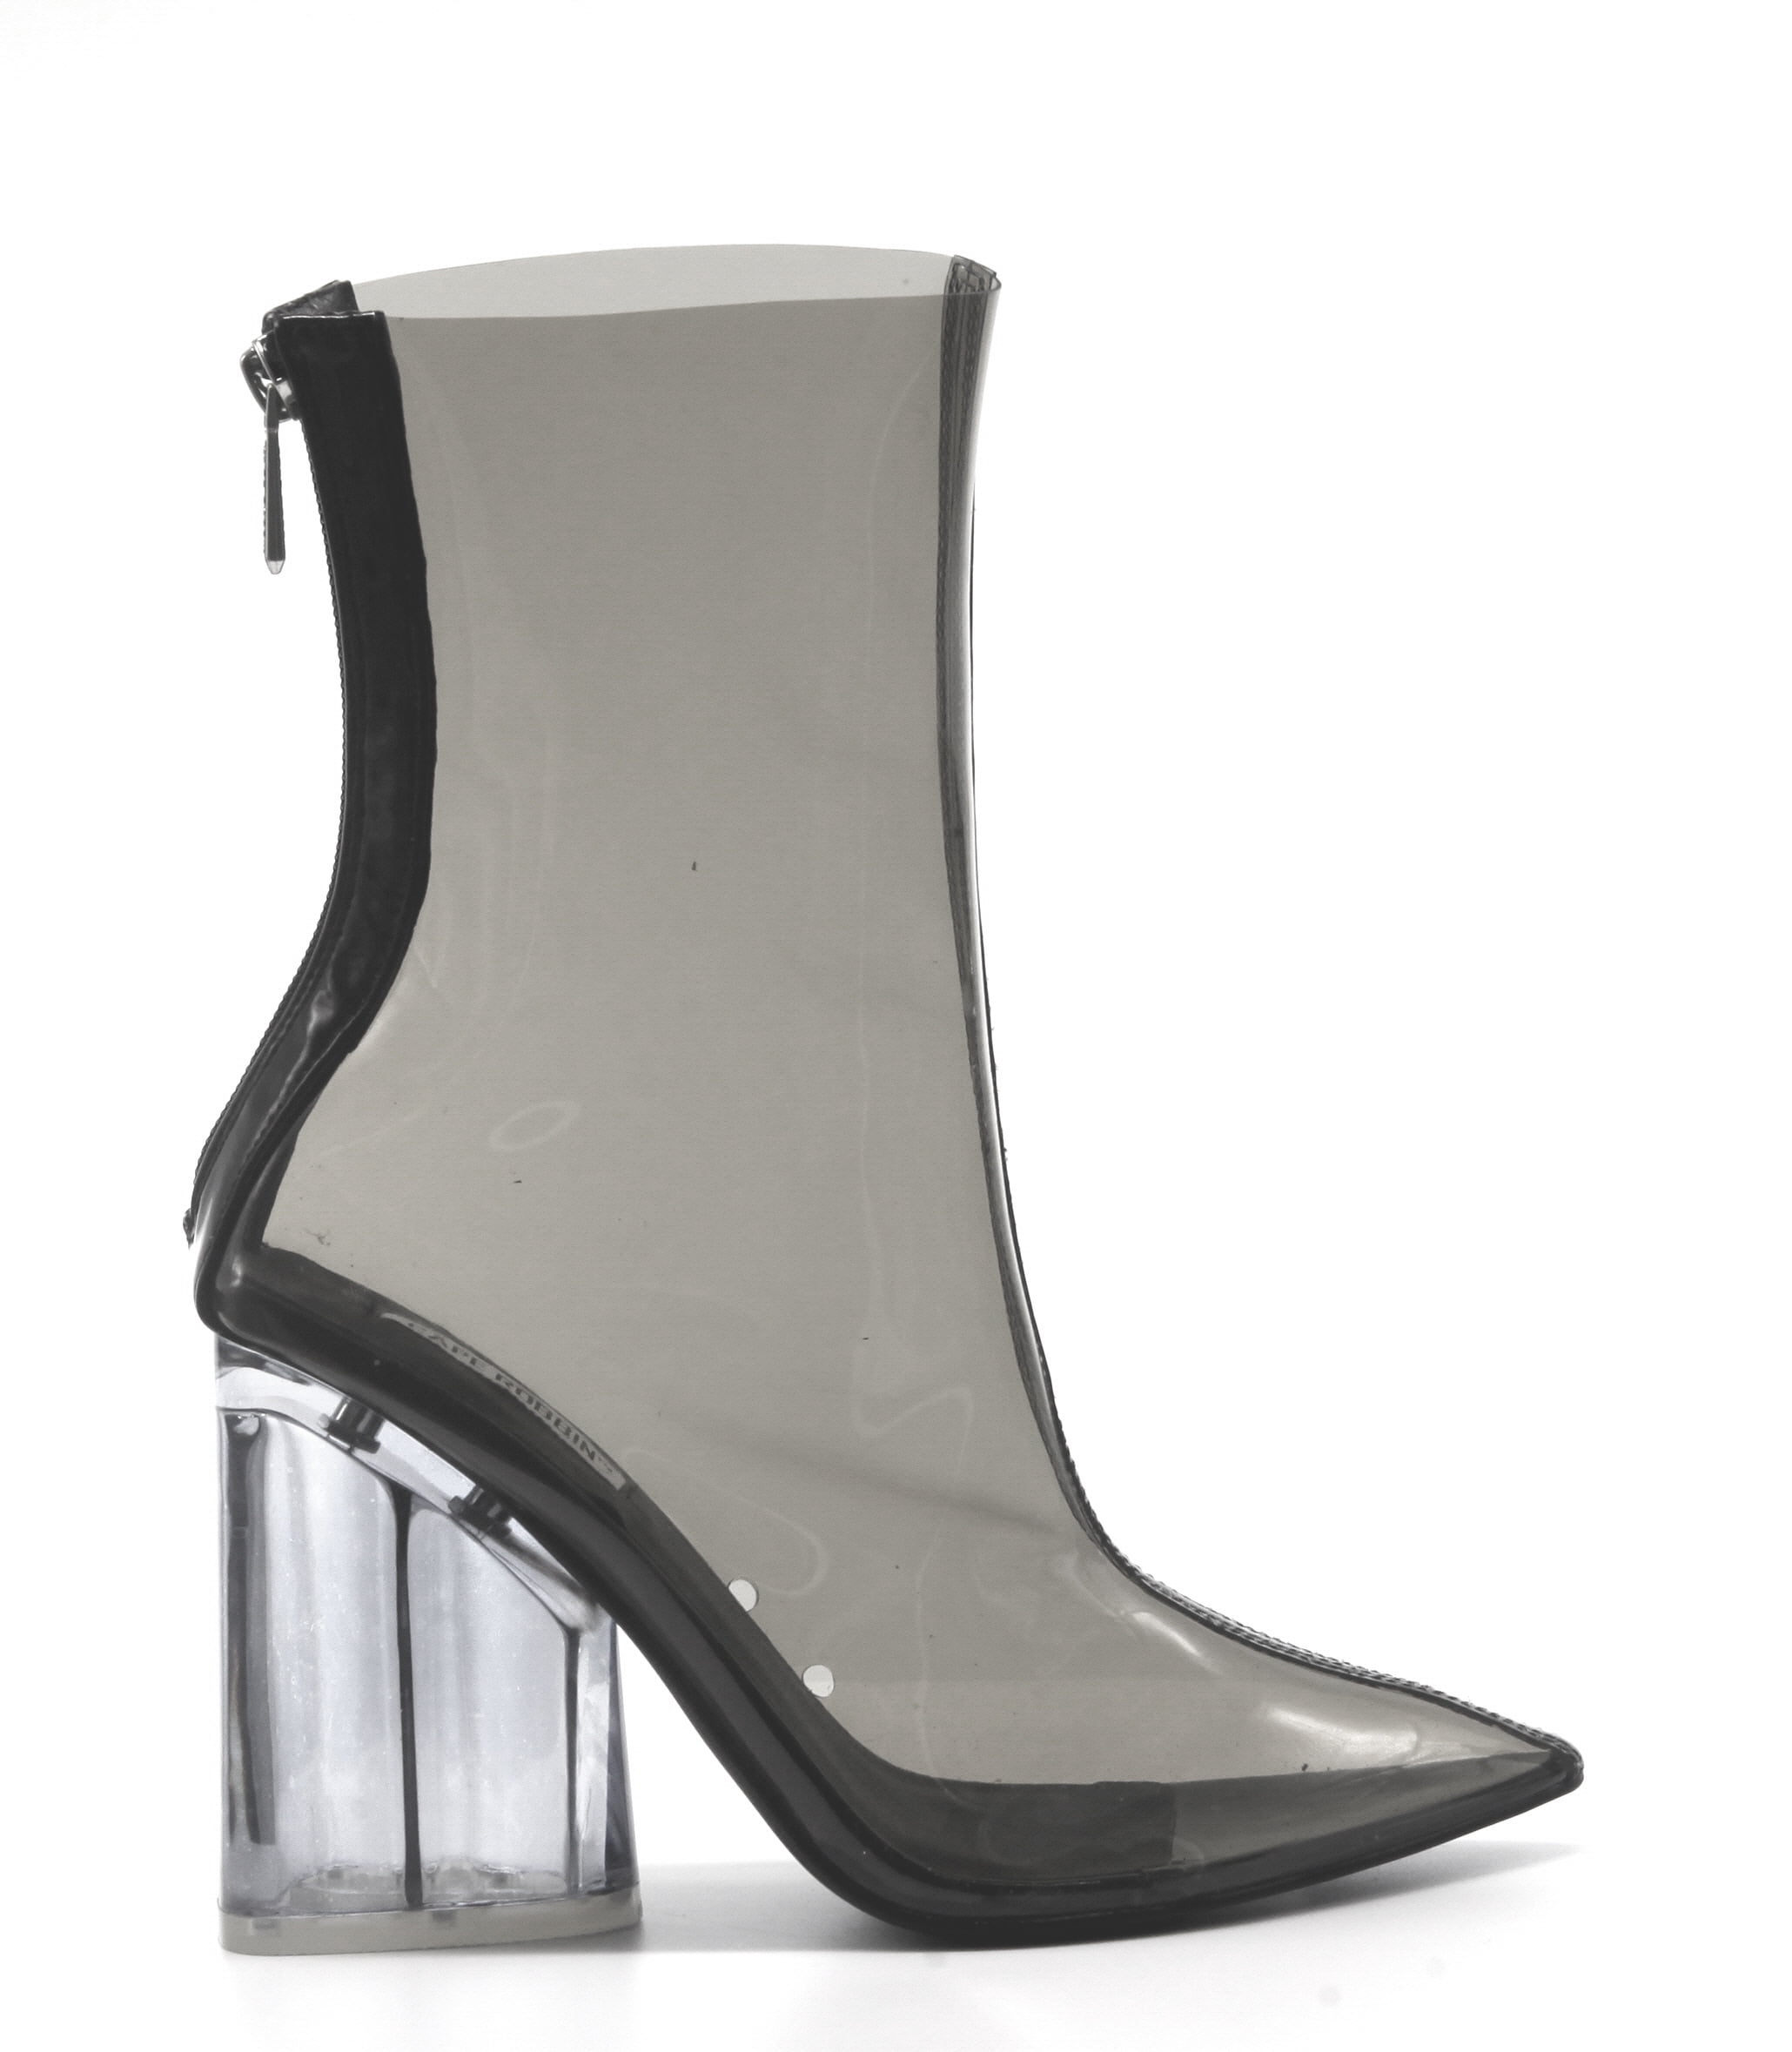 CAPE Crystal Glaze Womens Perspex Lucite Clear Pointy Toe Chunky Heel Ankle Boots, Black, 10 Walmart.com